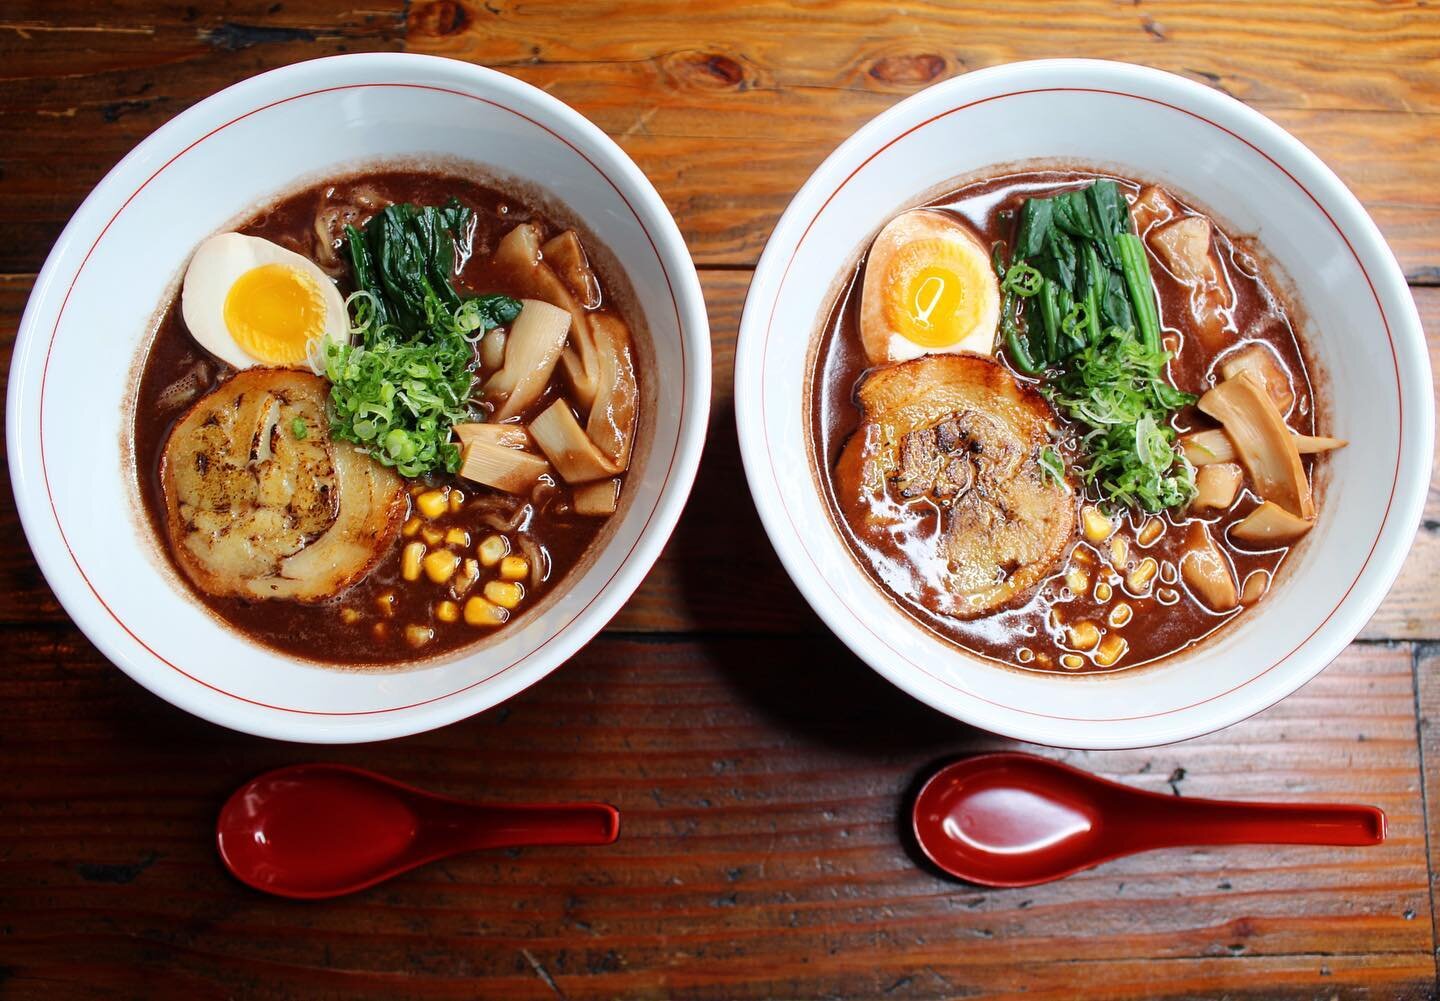 So come in with your Ramen partner in crime 🥢 or come hang with us &amp; take one home 🥡 for later! 
Either way... you don&rsquo;t want to regret not getting in that Perfect warm 🔥 Ramen while it&rsquo;s chilly 🥶 outside!